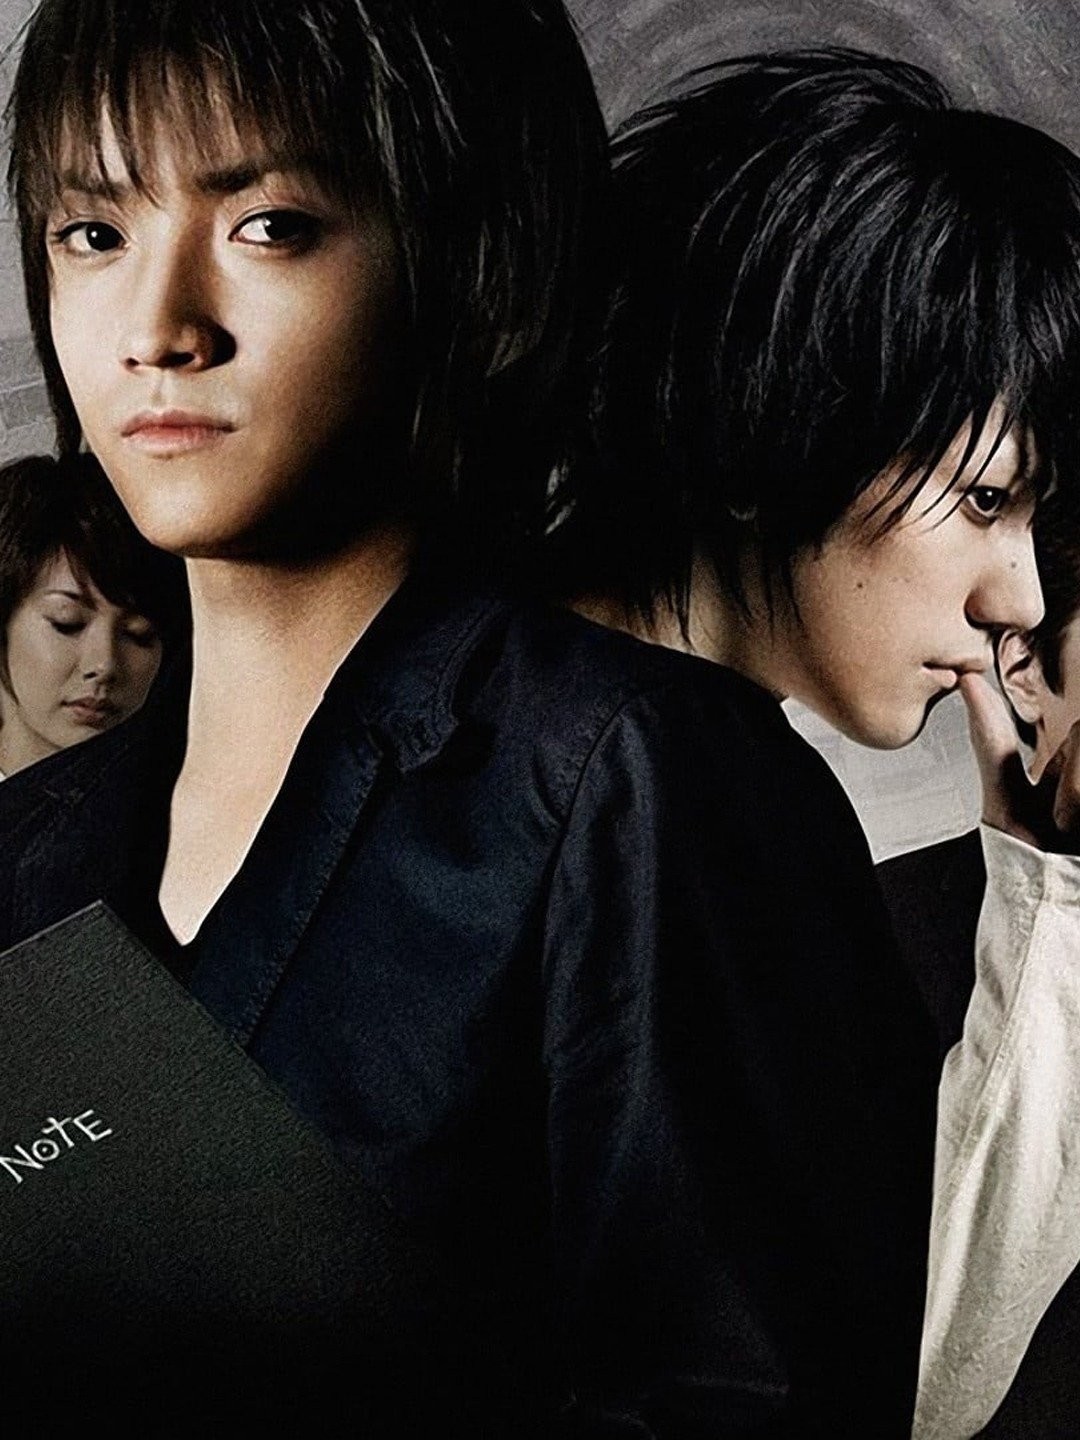 Righteous Film: Death Note II: The Last Note (2006)